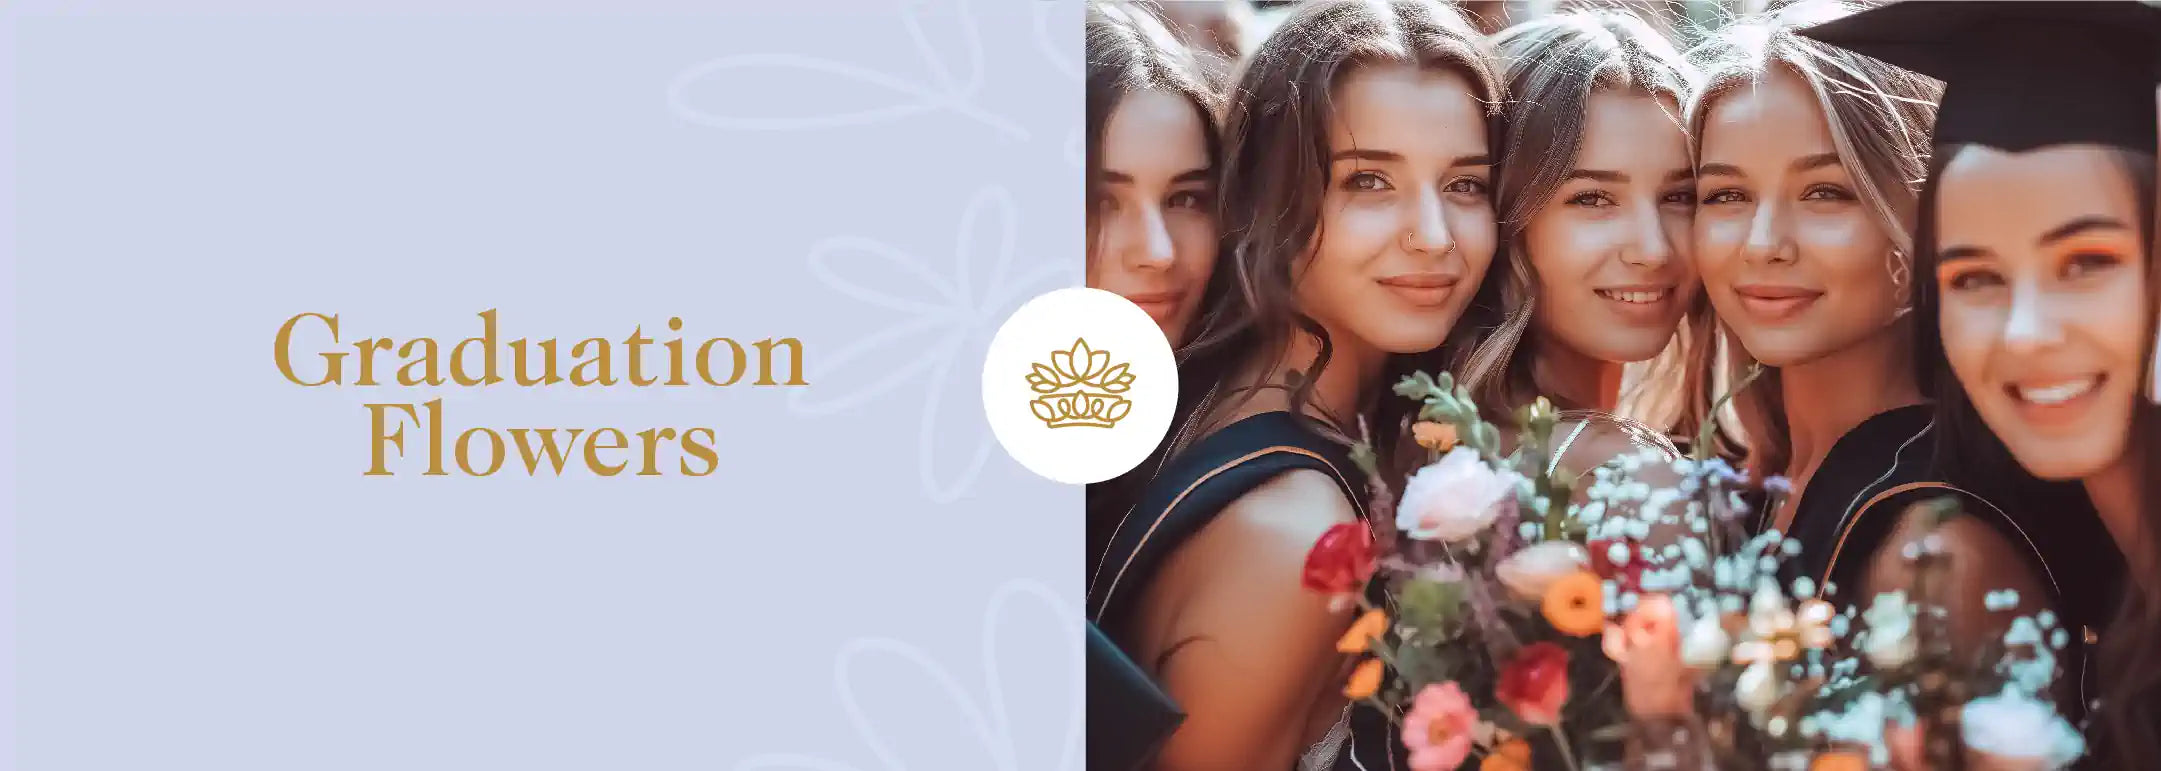 Group of joyful female graduates holding a colourful bouquet of graduation flowers, celebrating their achievement. This image is part of the Fabulous Flowers and Gifts - Graduation Flowers Collection